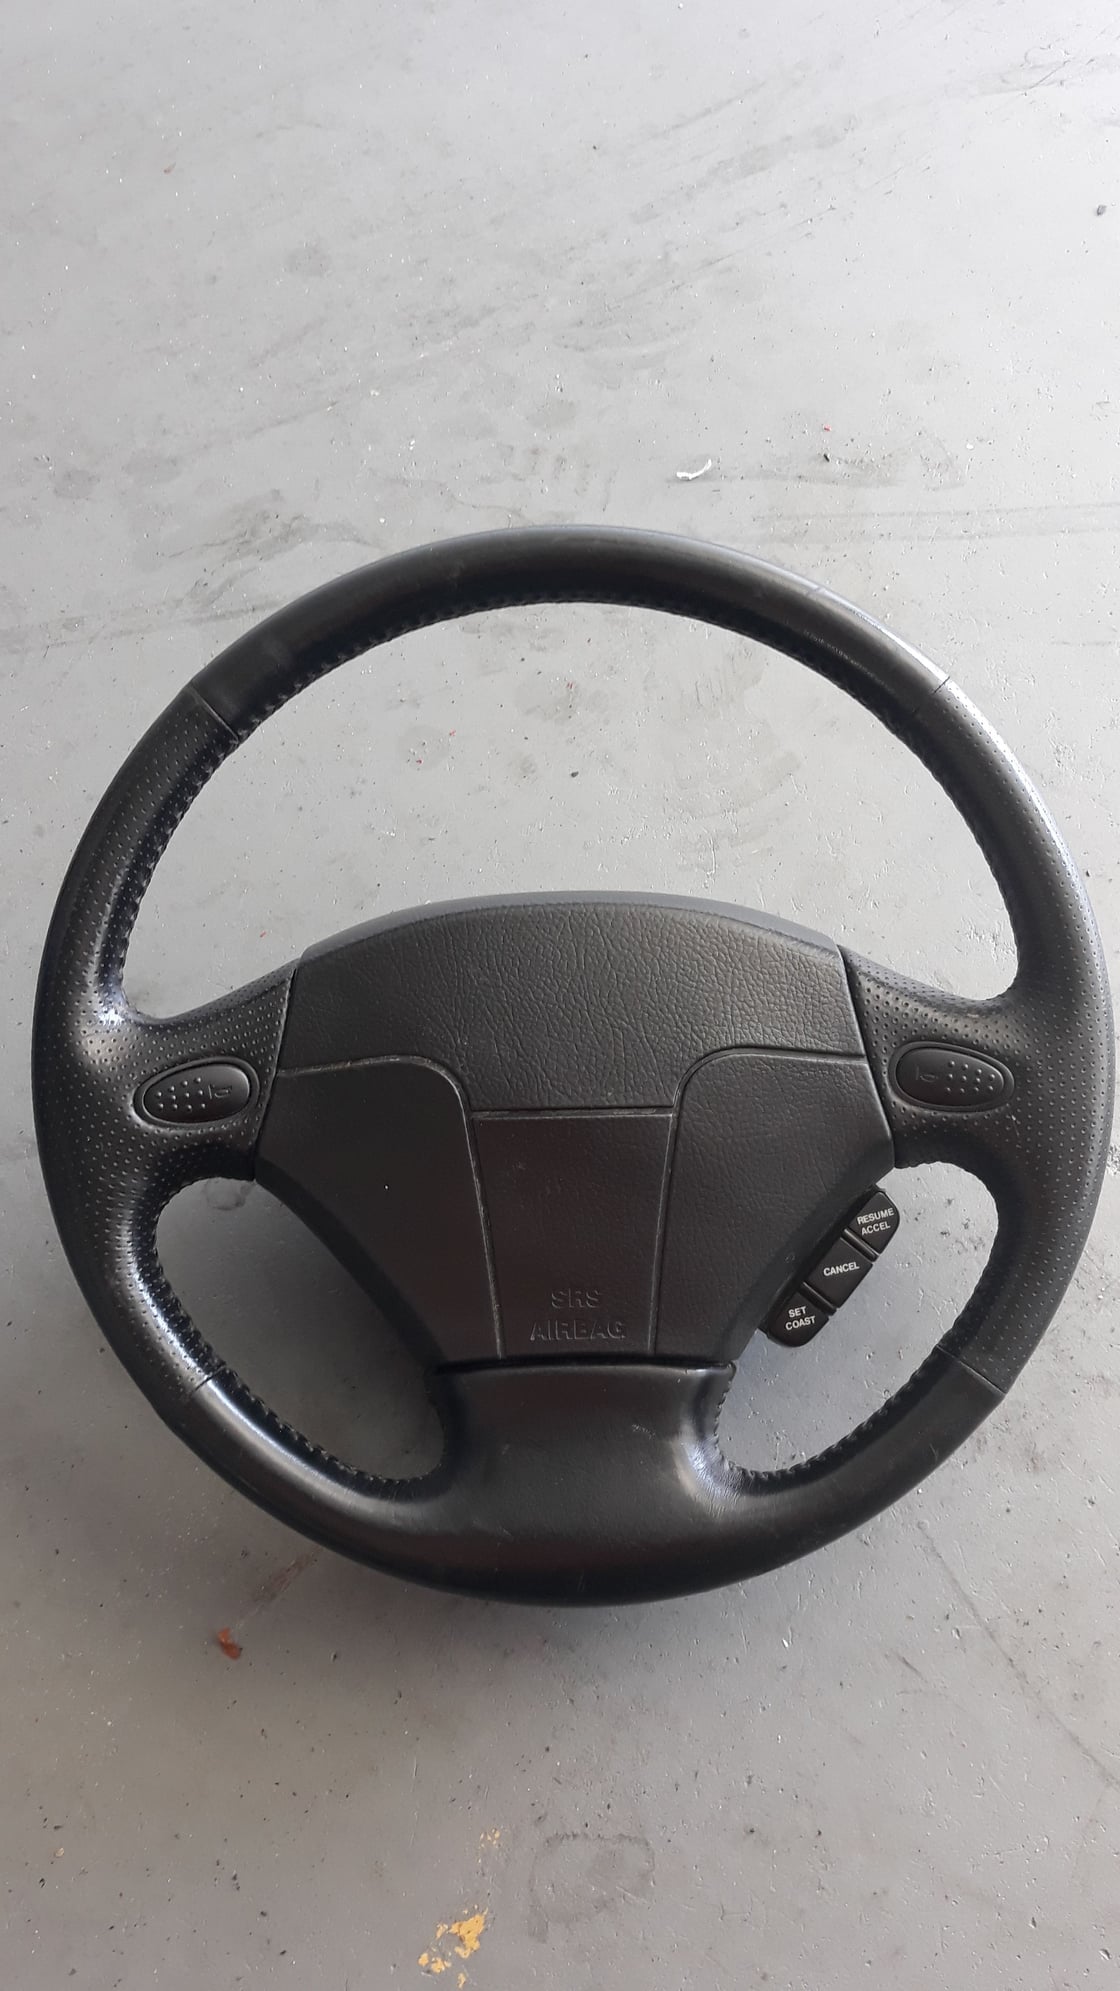 Interior/Upholstery - OEM Rx7 steering wheel with air bag - Used - 1992 to 2002 Mazda RX-7 - Orlando, FL 32824, United States